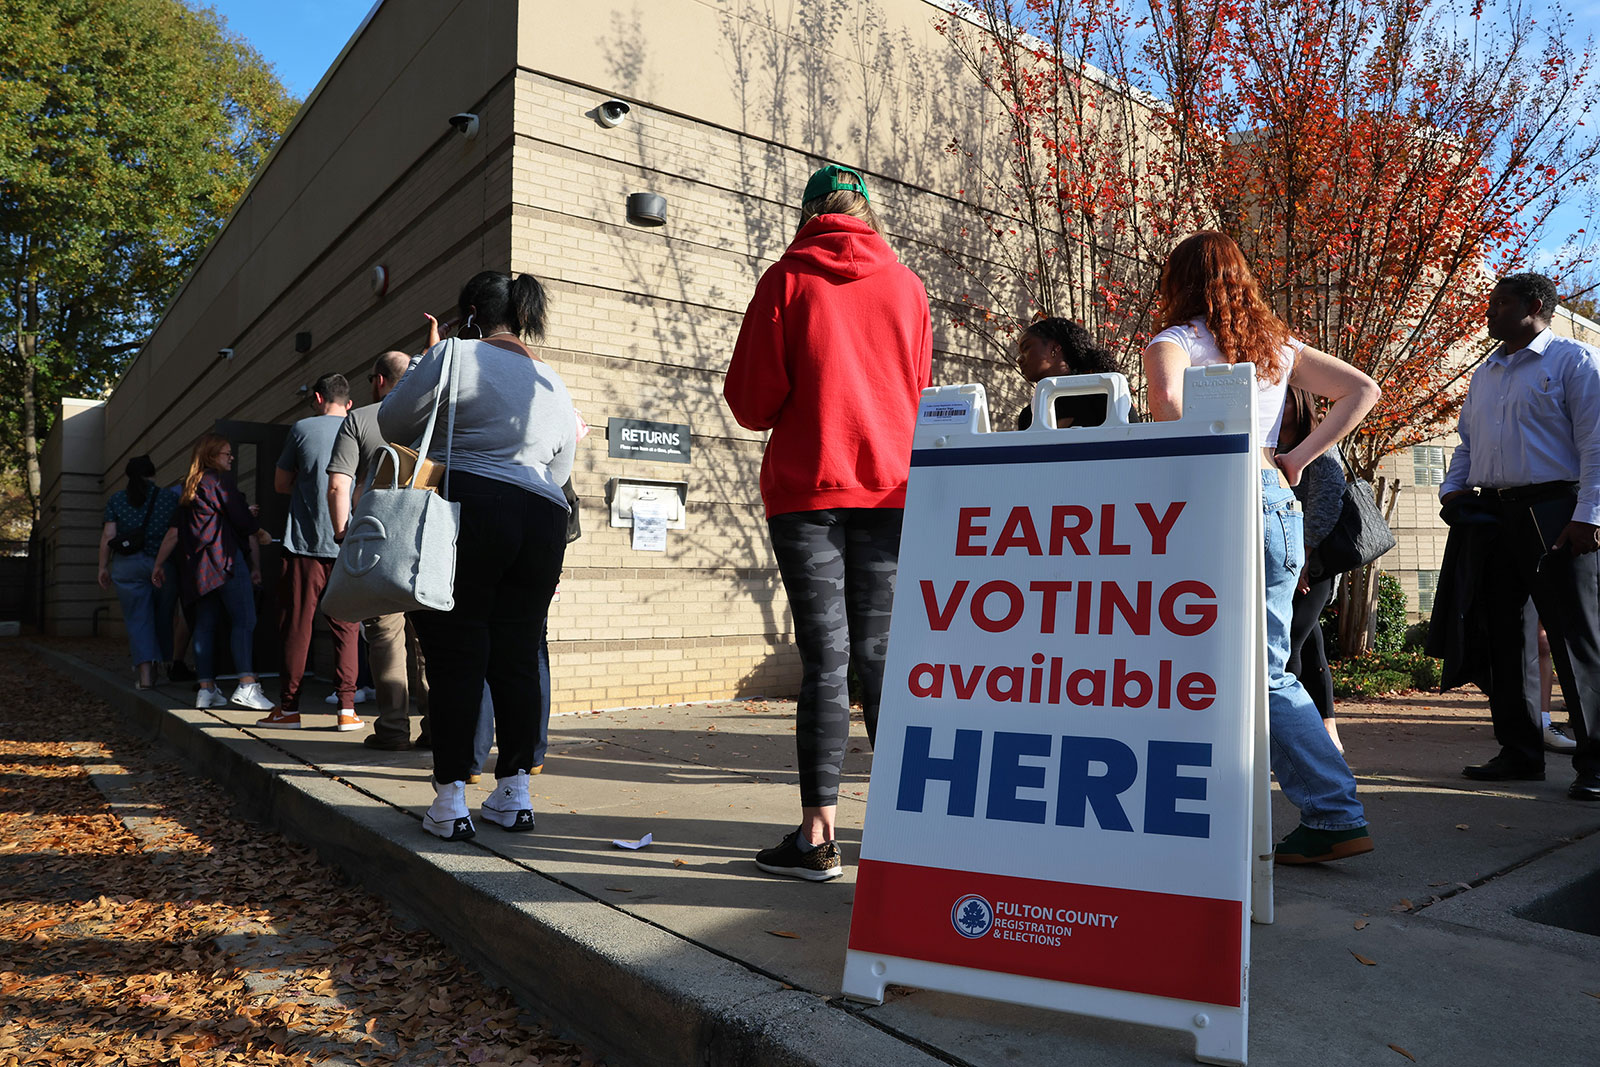 People wait in line for early voting on November 4, in Atlanta 